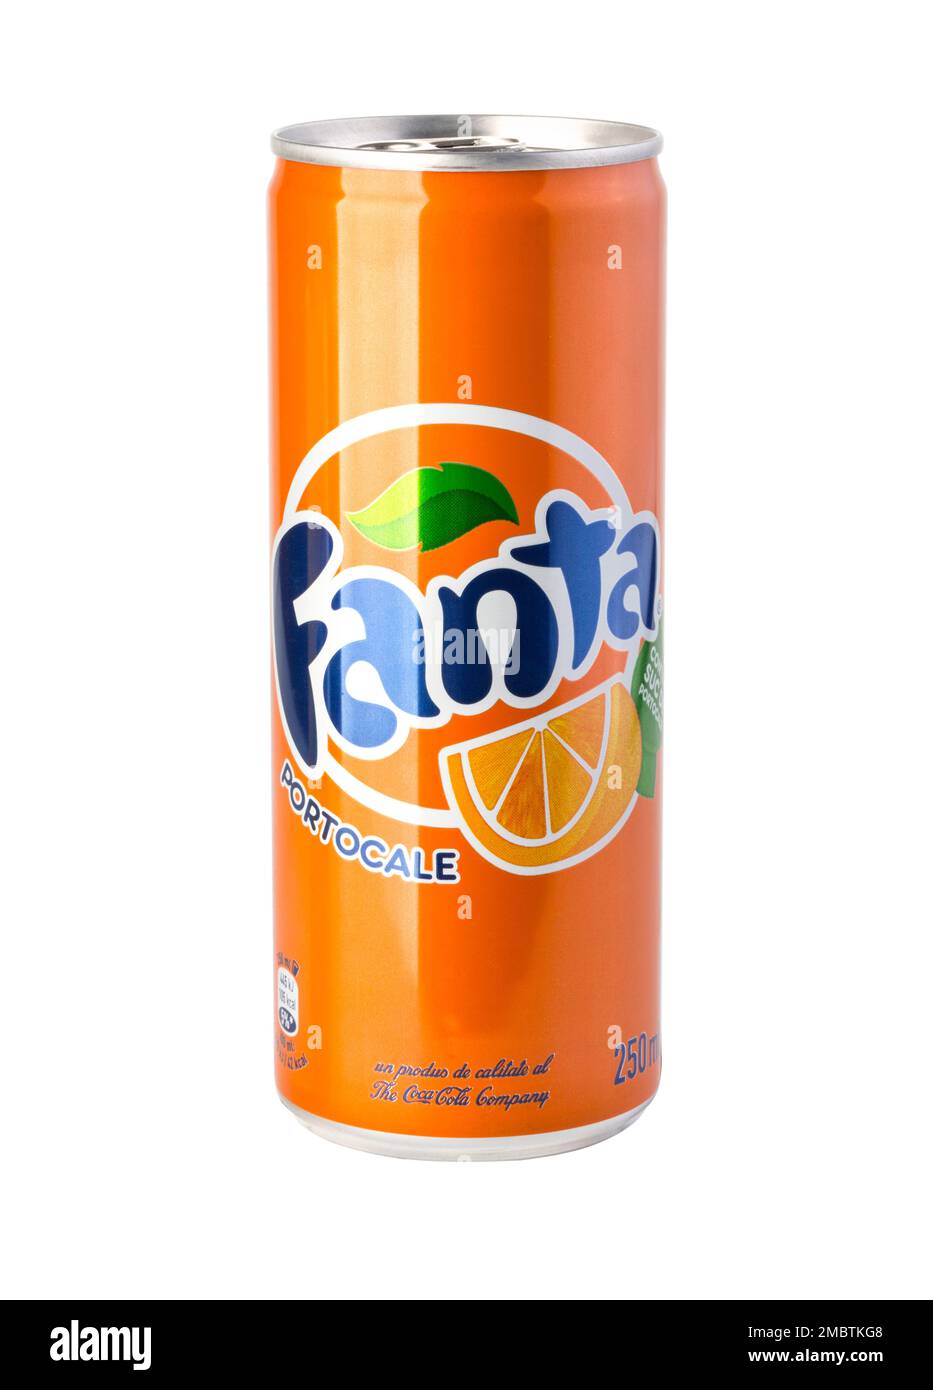 CHISINAU, MOLDOVA - NOVEMBER 14, 2015: Fanta can orange on white background. Fanta is popular fruit-flavored carbonated soft drink created by Coca-Col Stock Photo